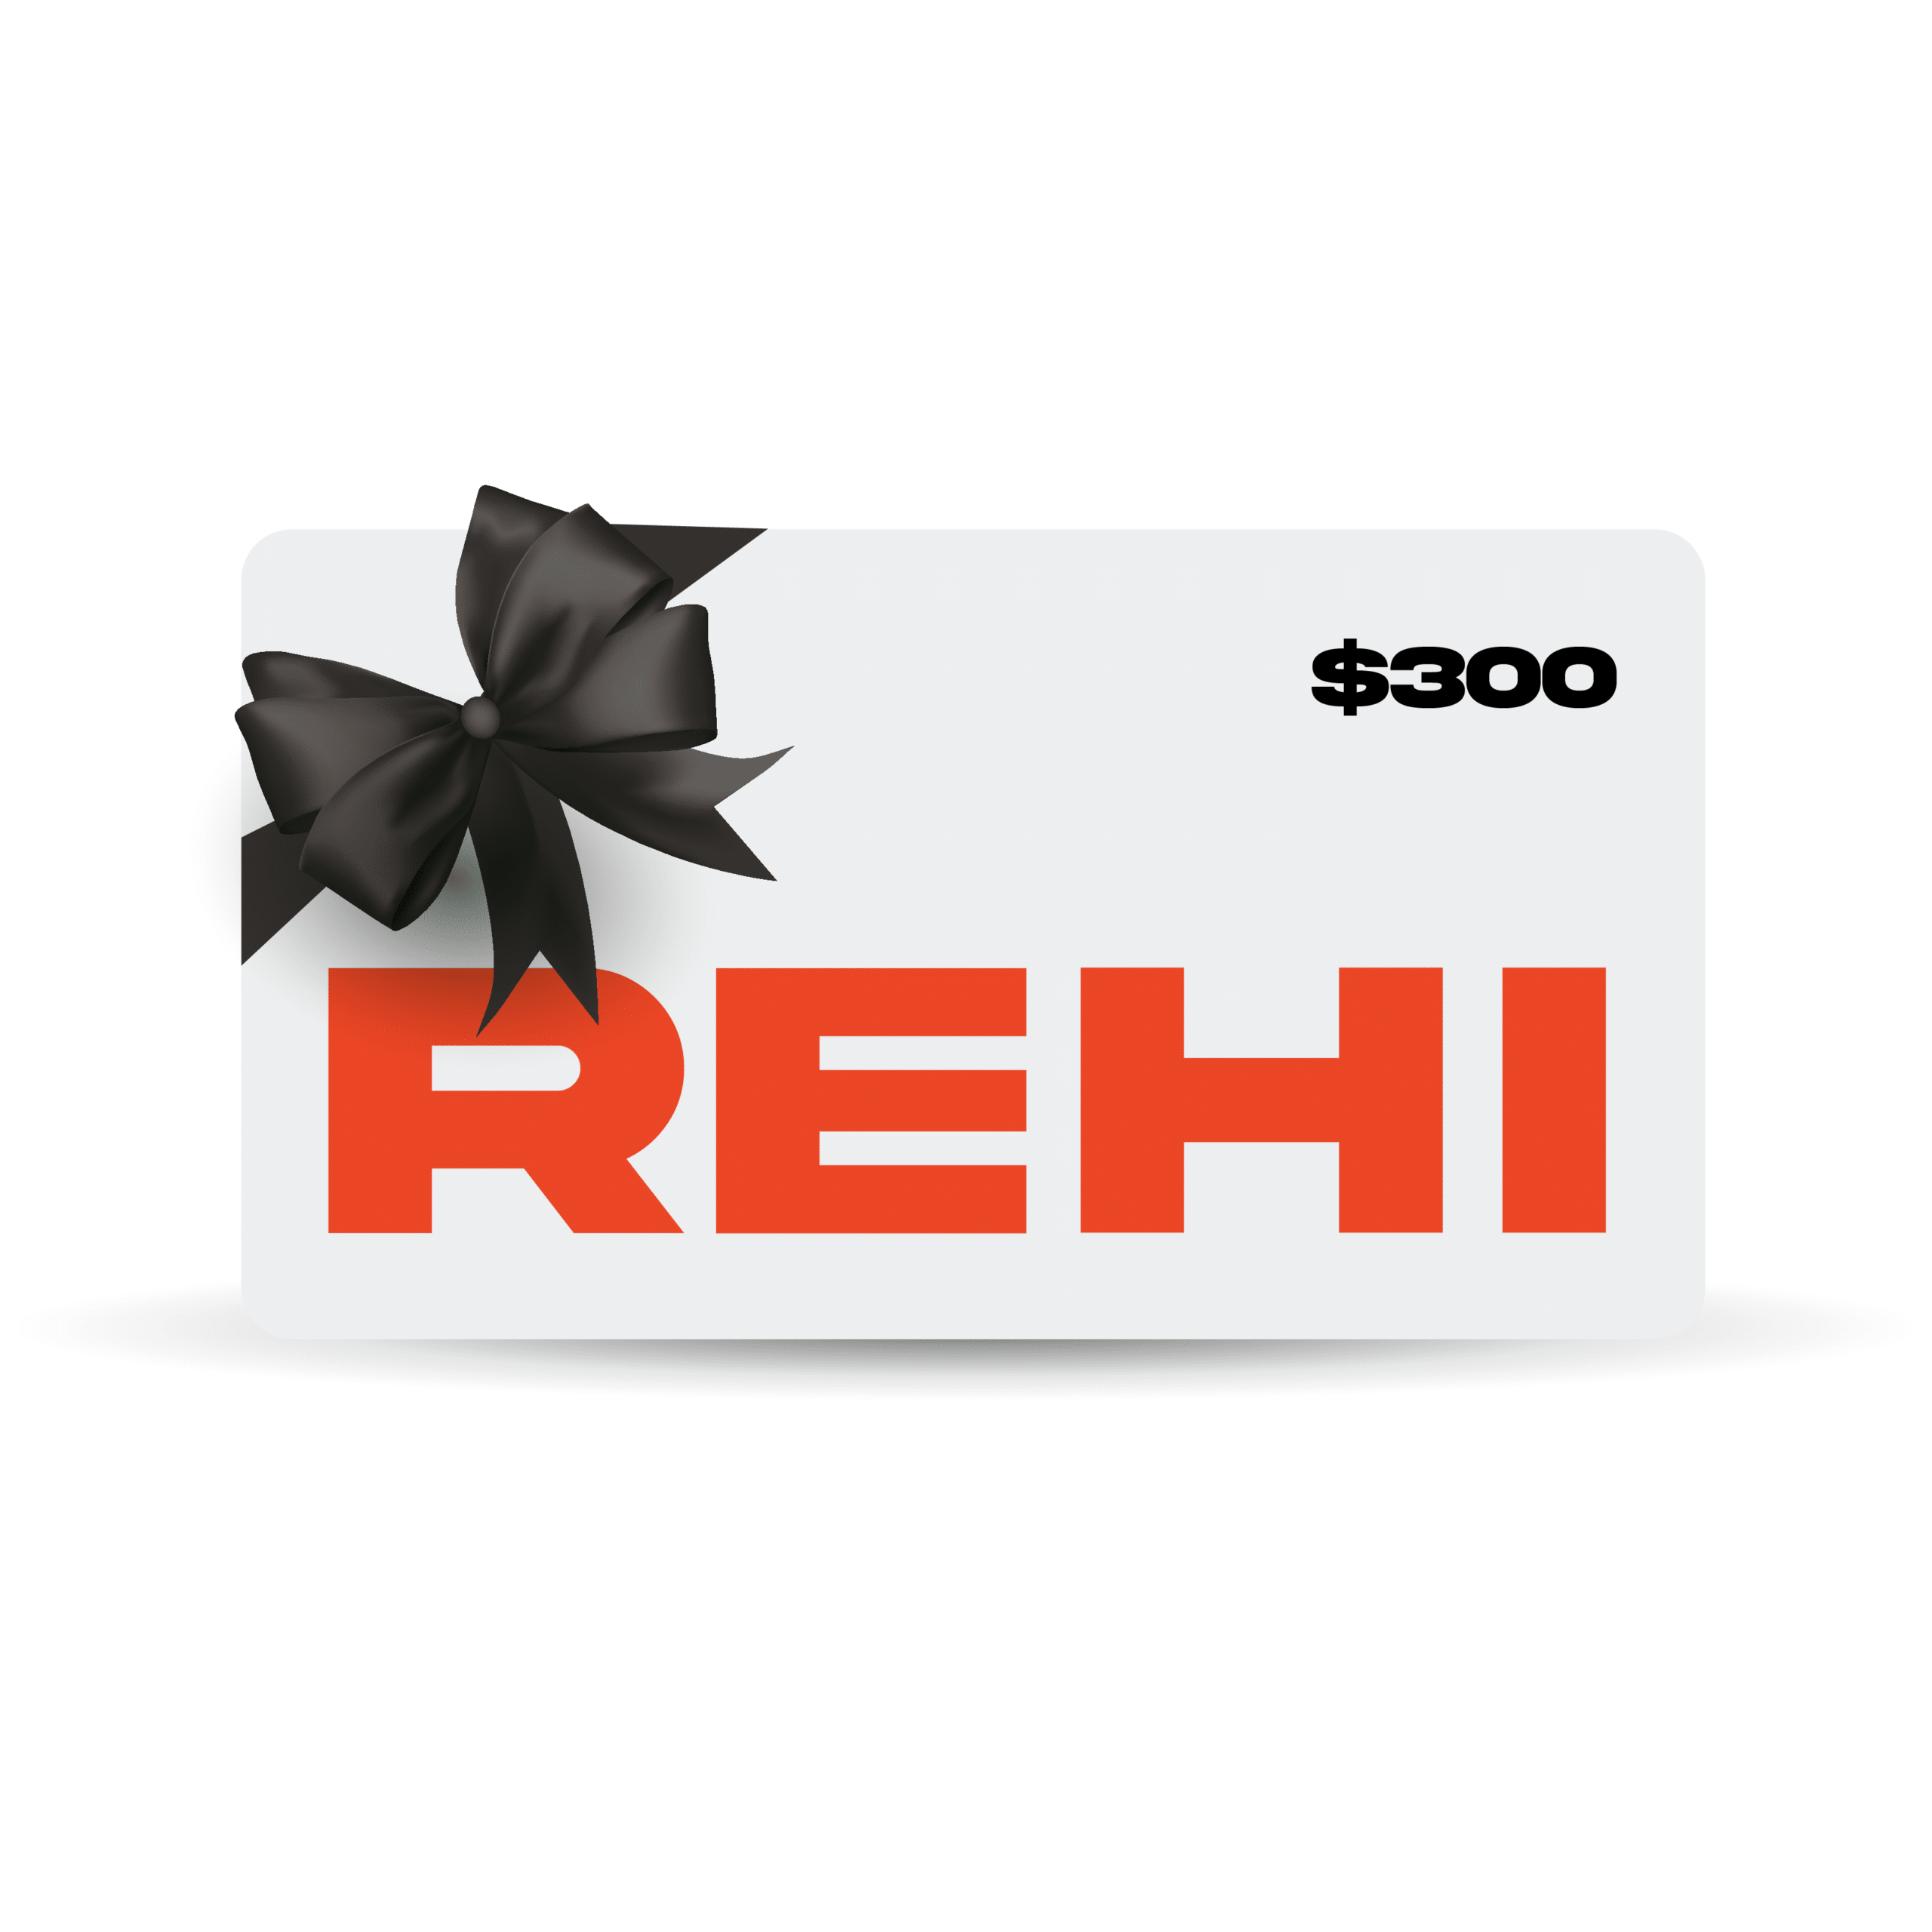 attribute_gift-card-amount: $300